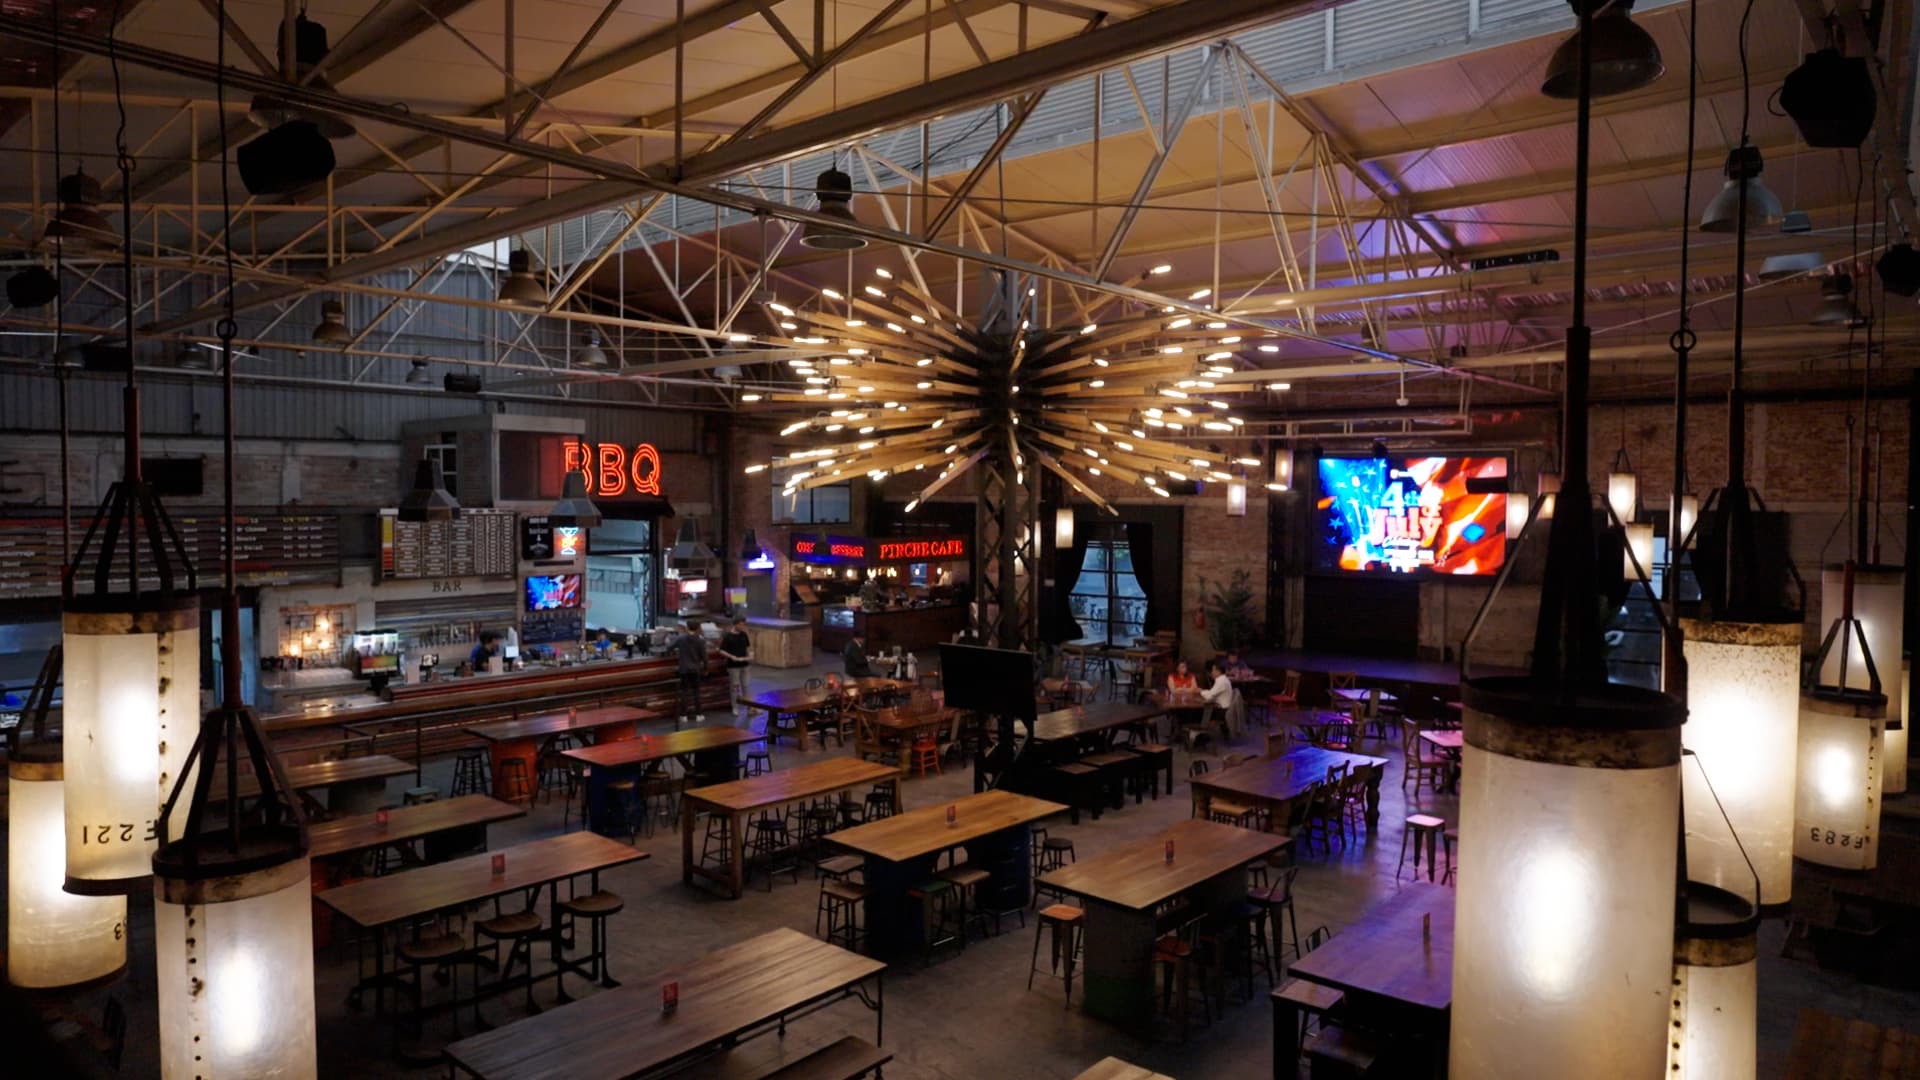 The Pinche Gringo BBQ warehouse is the biggest location and can hold up to 3,000 people.